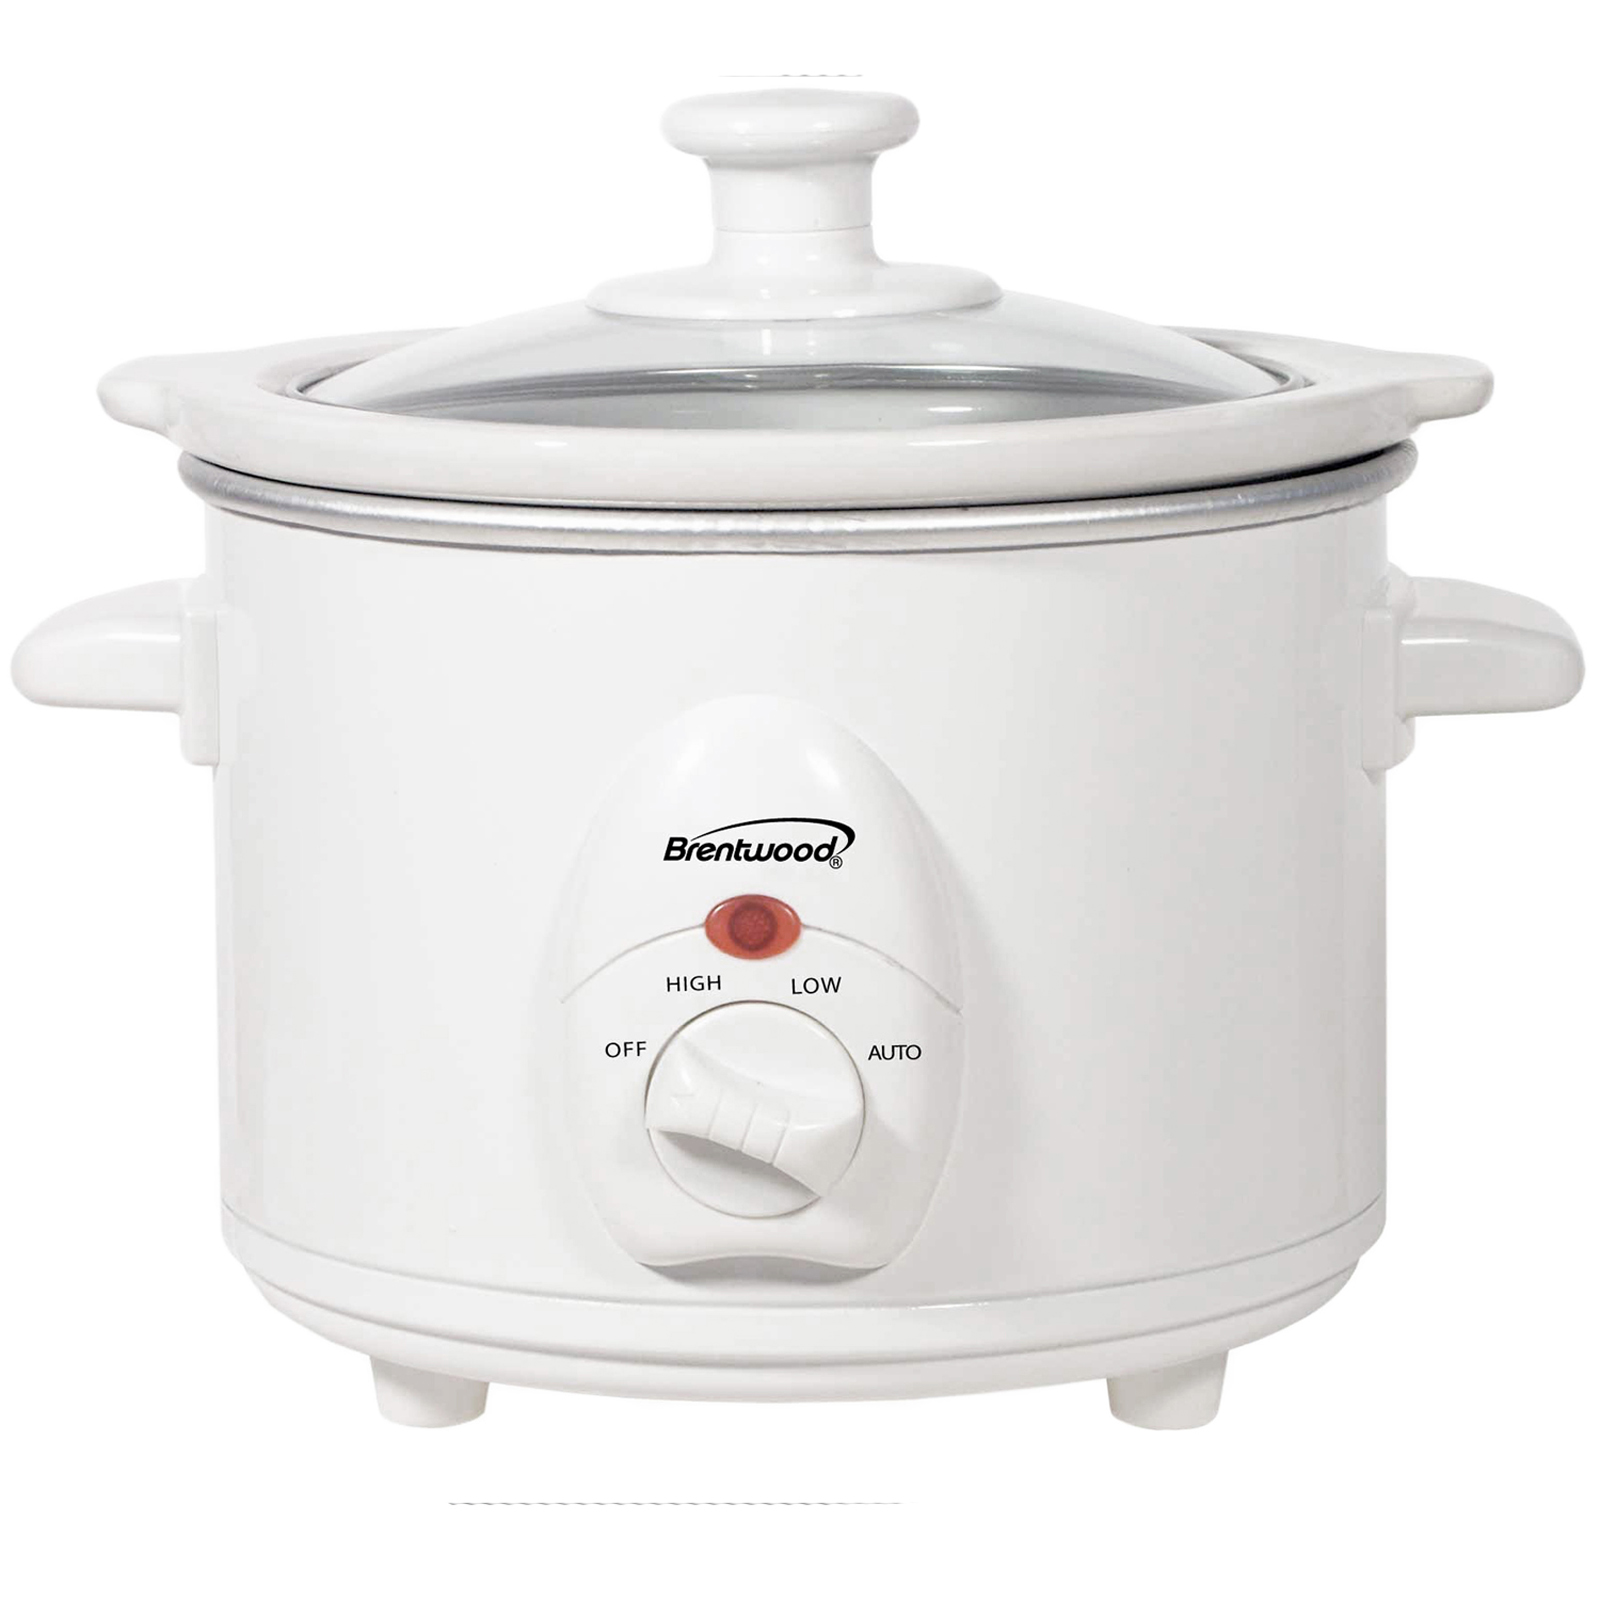 Brentwood 97083283M 1.5 qt. Slow Cooker - White